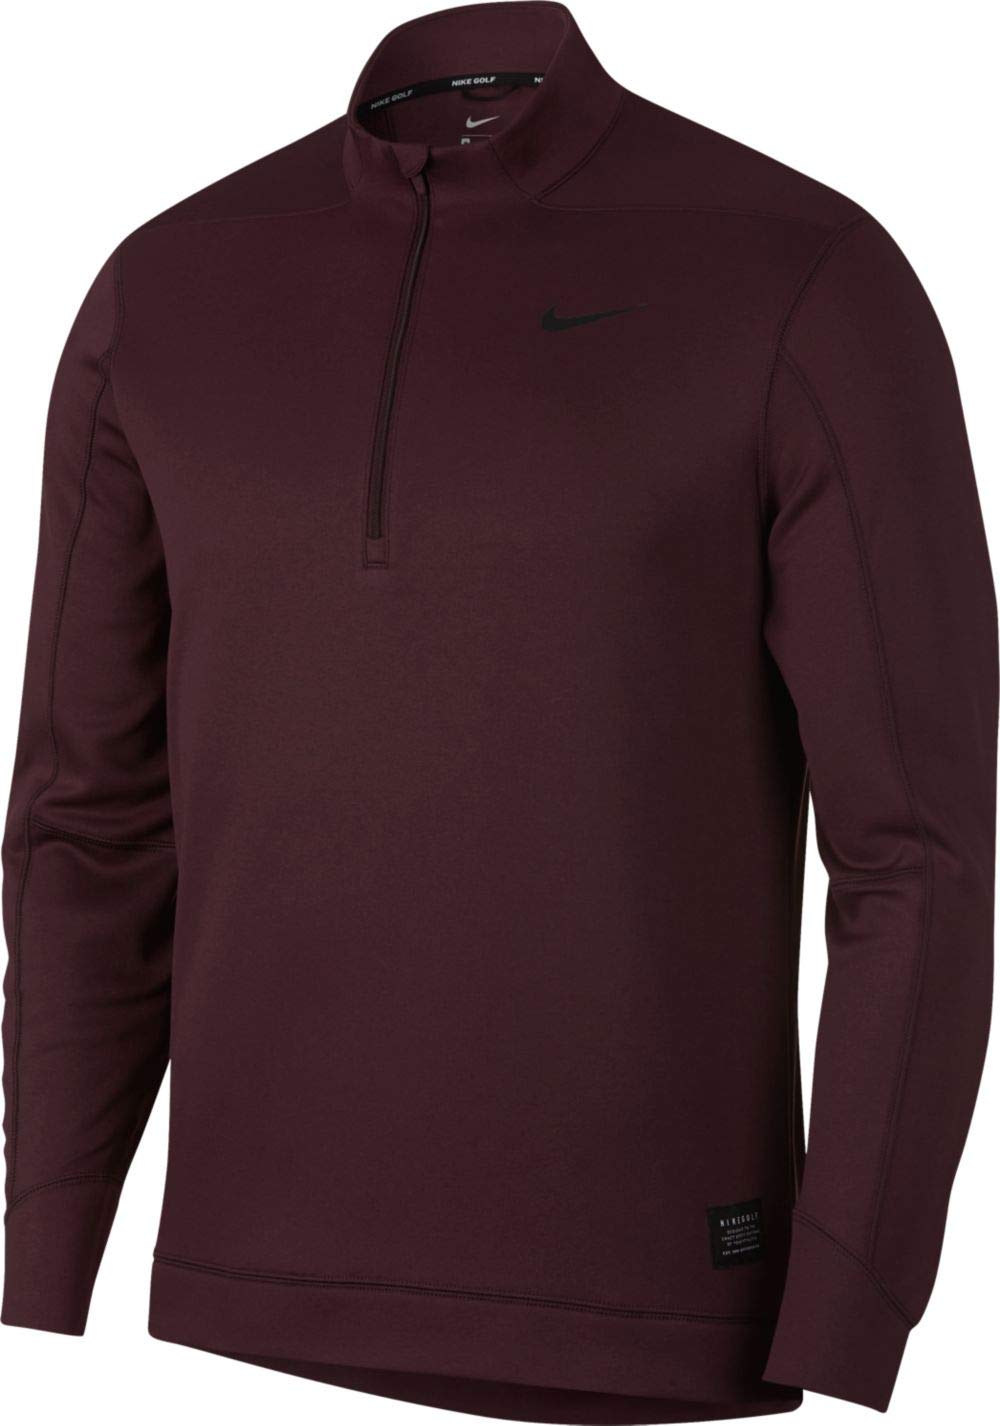 Nike Mens Therma Top Golf Pullovers